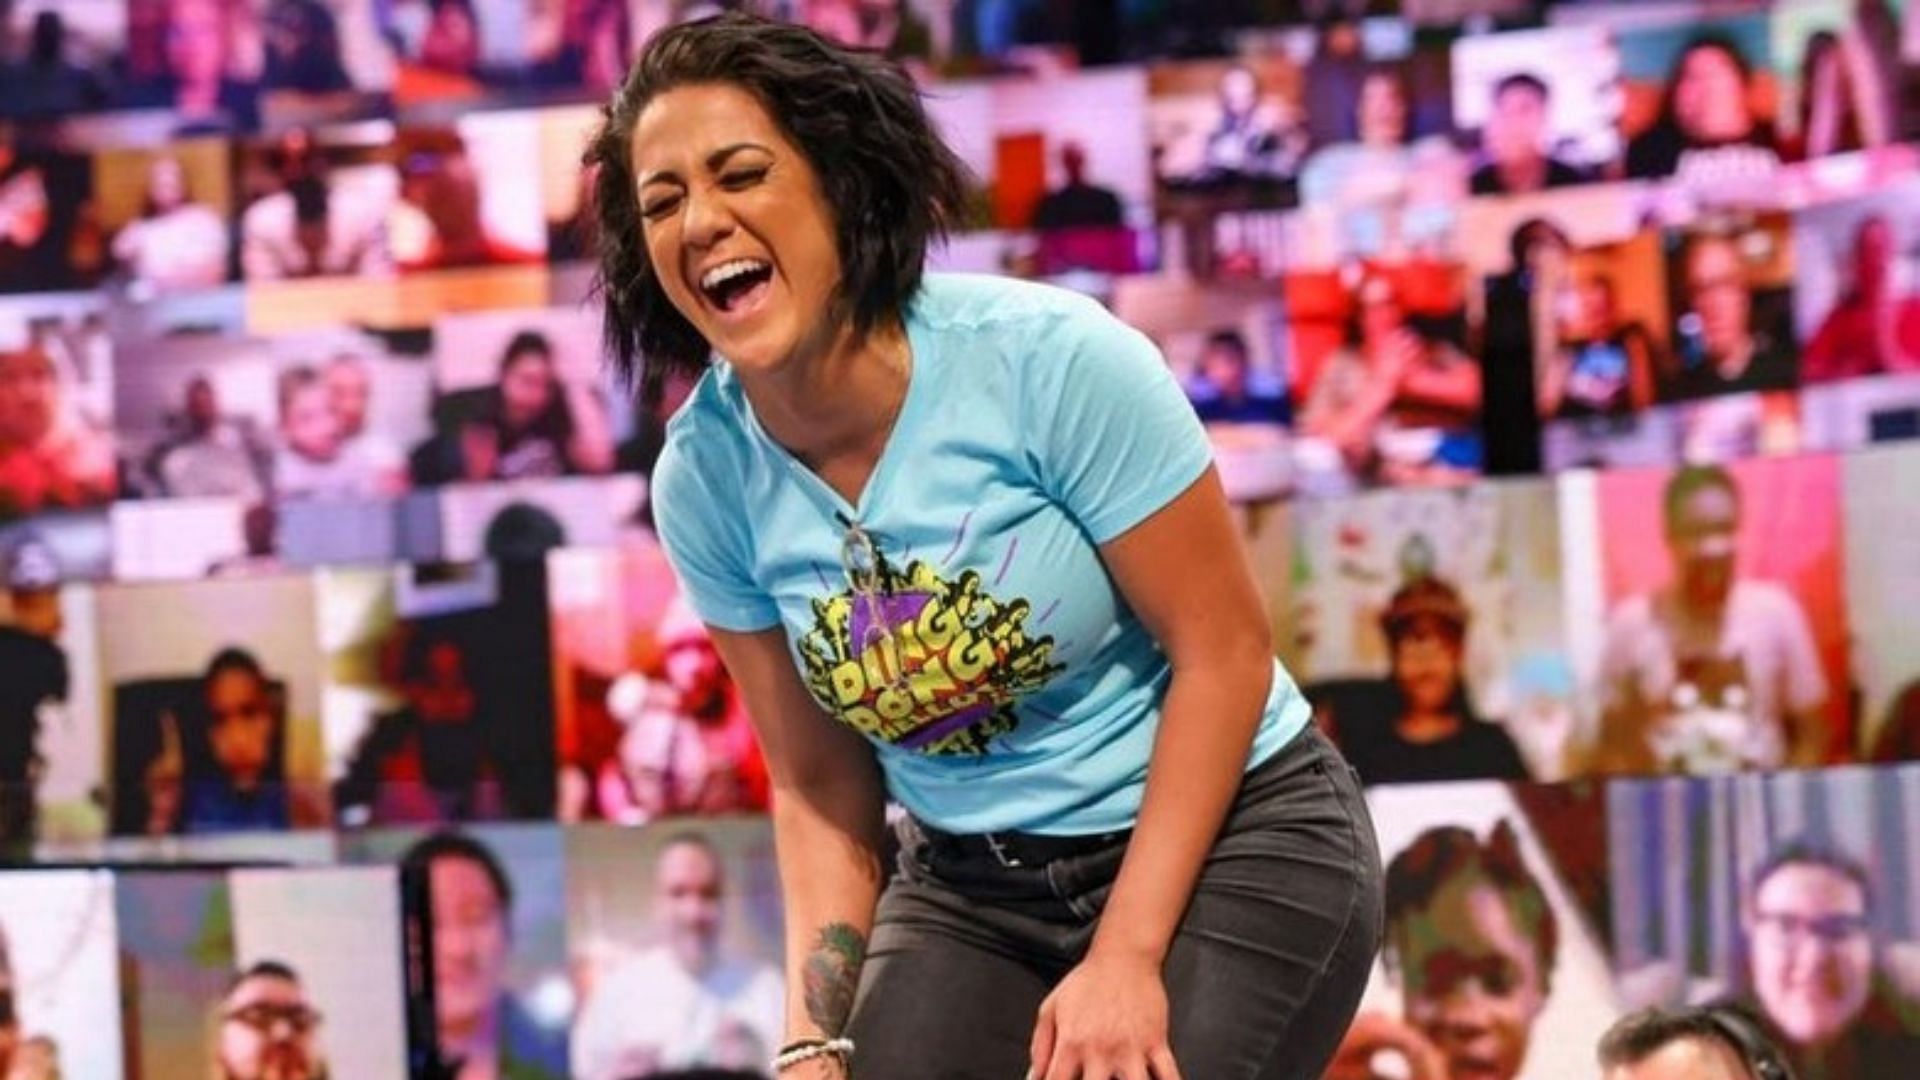 Bayley took a dig at Roxanne Perez after SmackDown